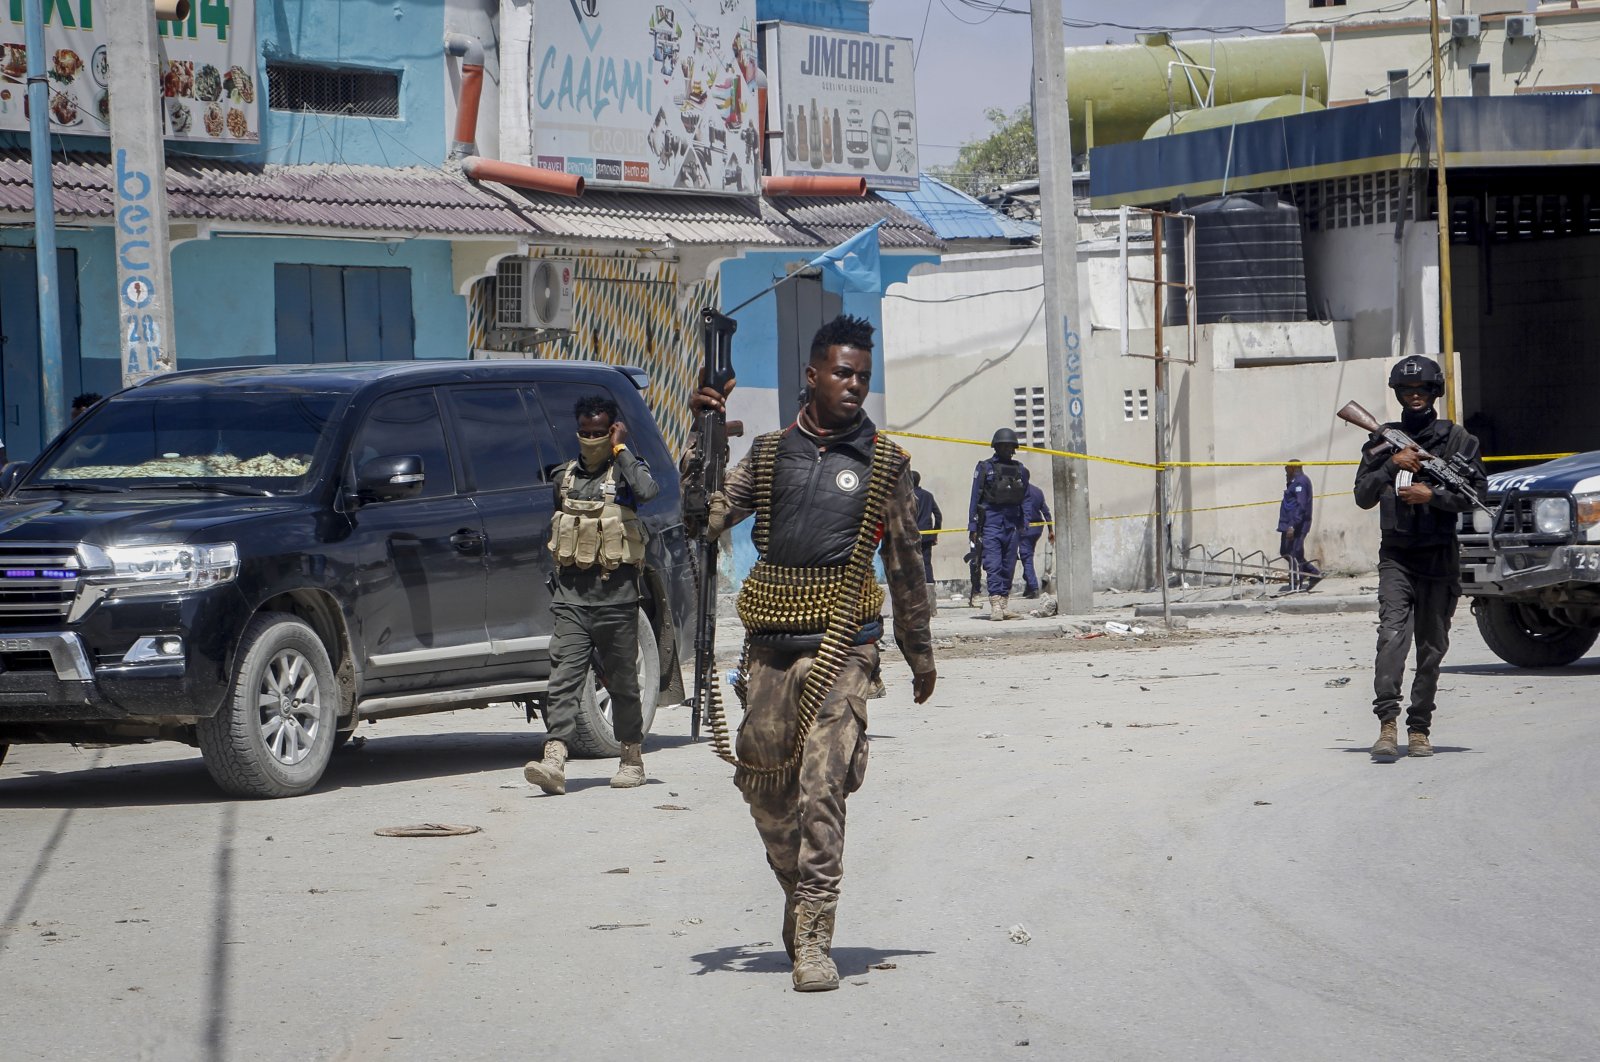 Security forces patrol at the scene, after gunmen stormed a hotel in the capital Mogadishu, Somalia, Aug. 21, 2022. (AP Photo)